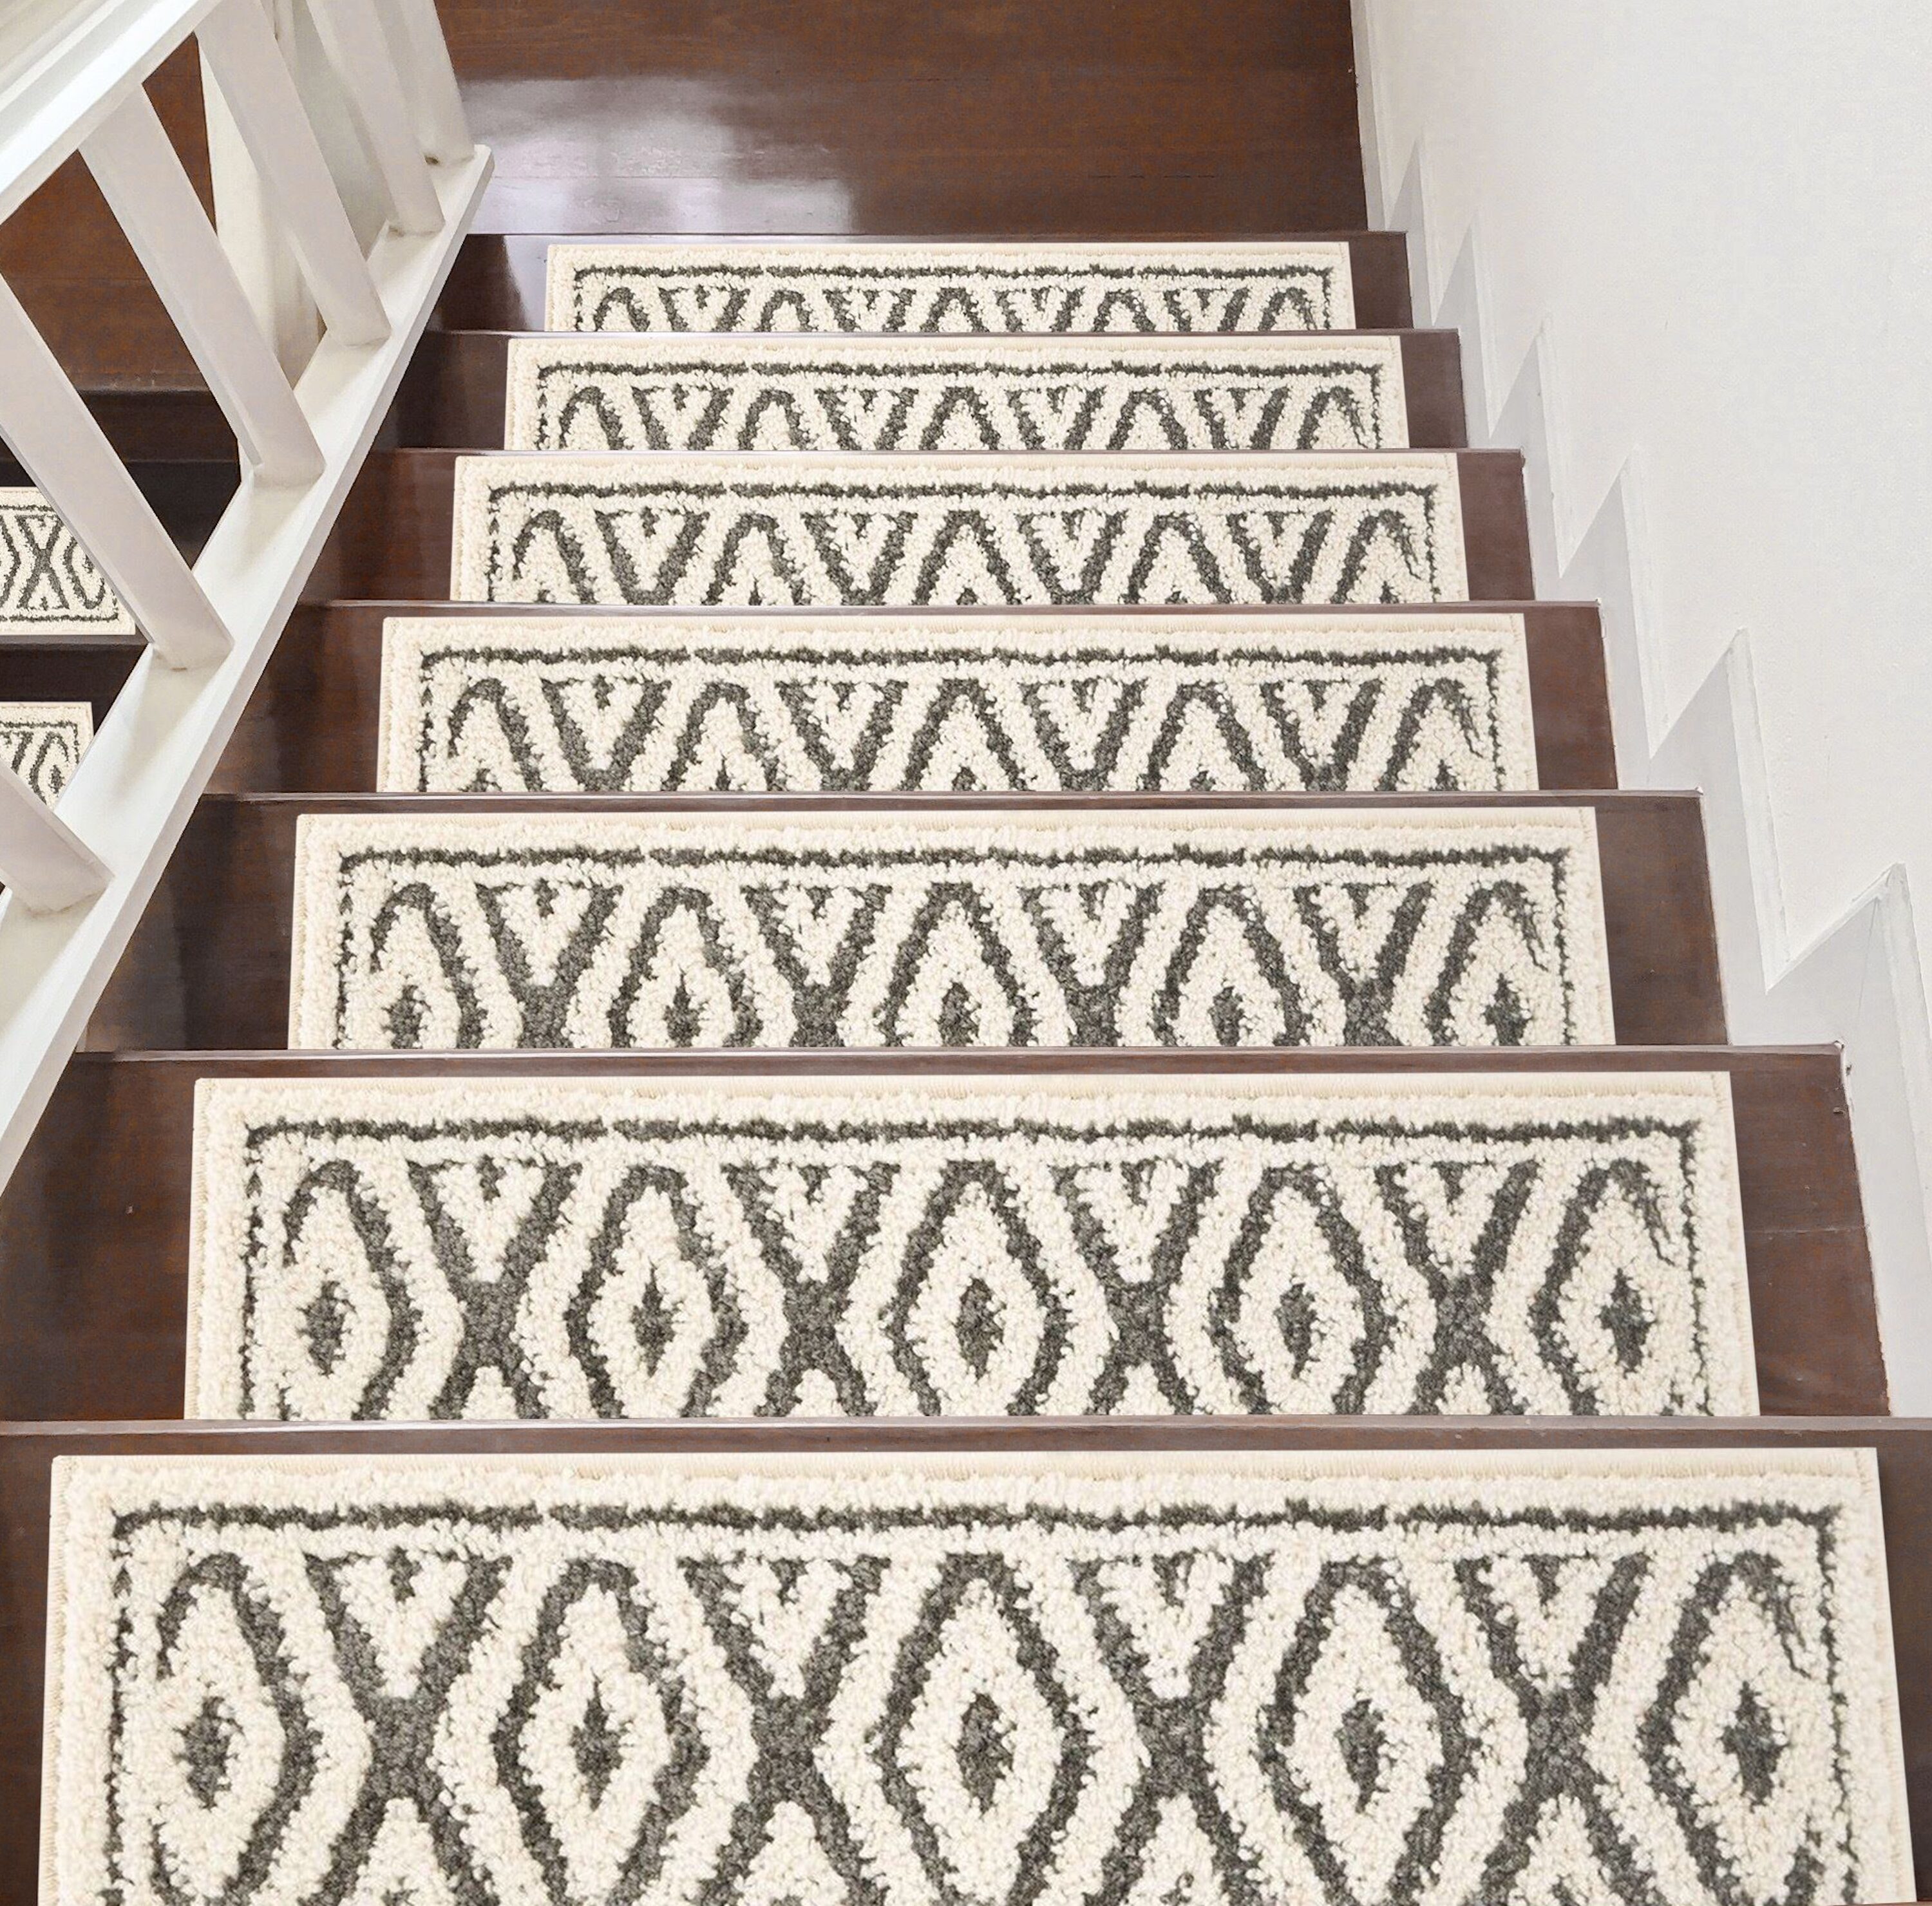 Stair Treads, Anti-slip Carpet Strips for Indoor Stairs, Stair